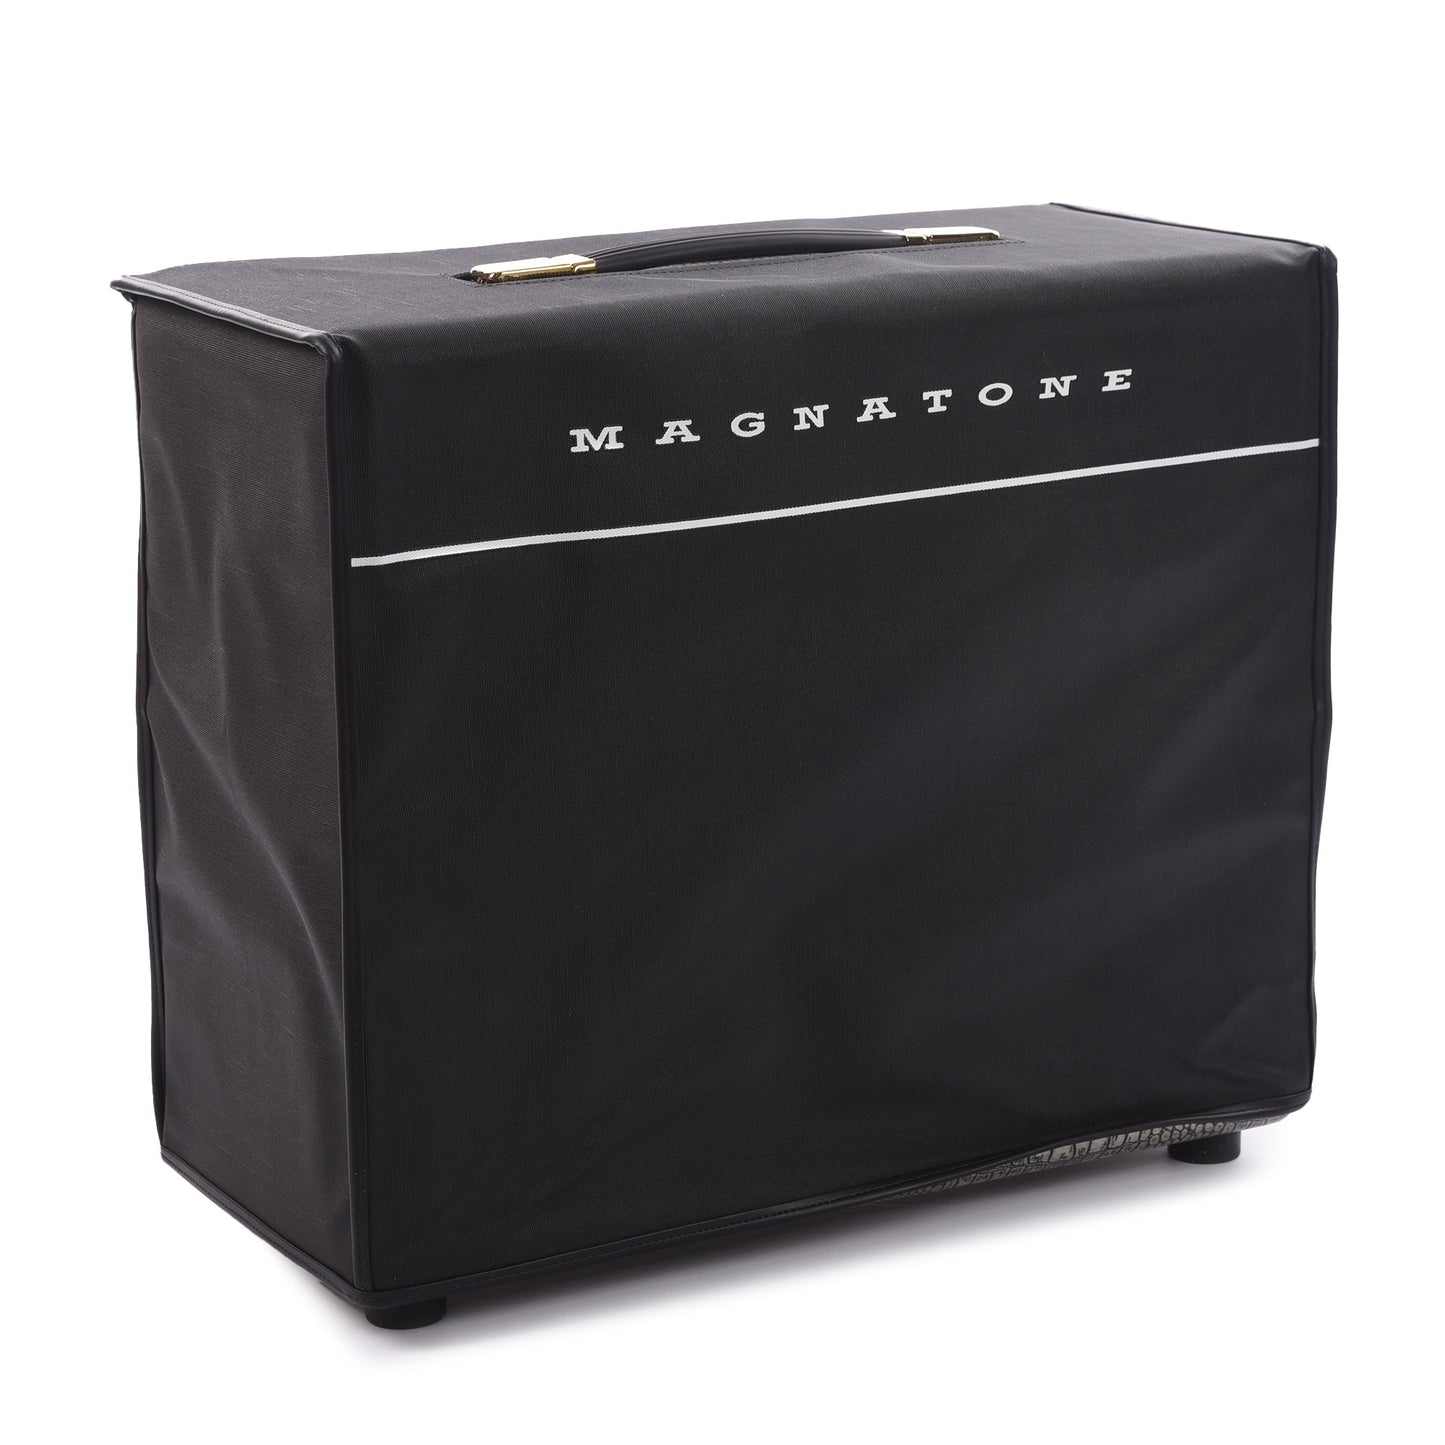 Magnatone 1x12" Super Fifteen Extension Cabinet Croc Collection Gold